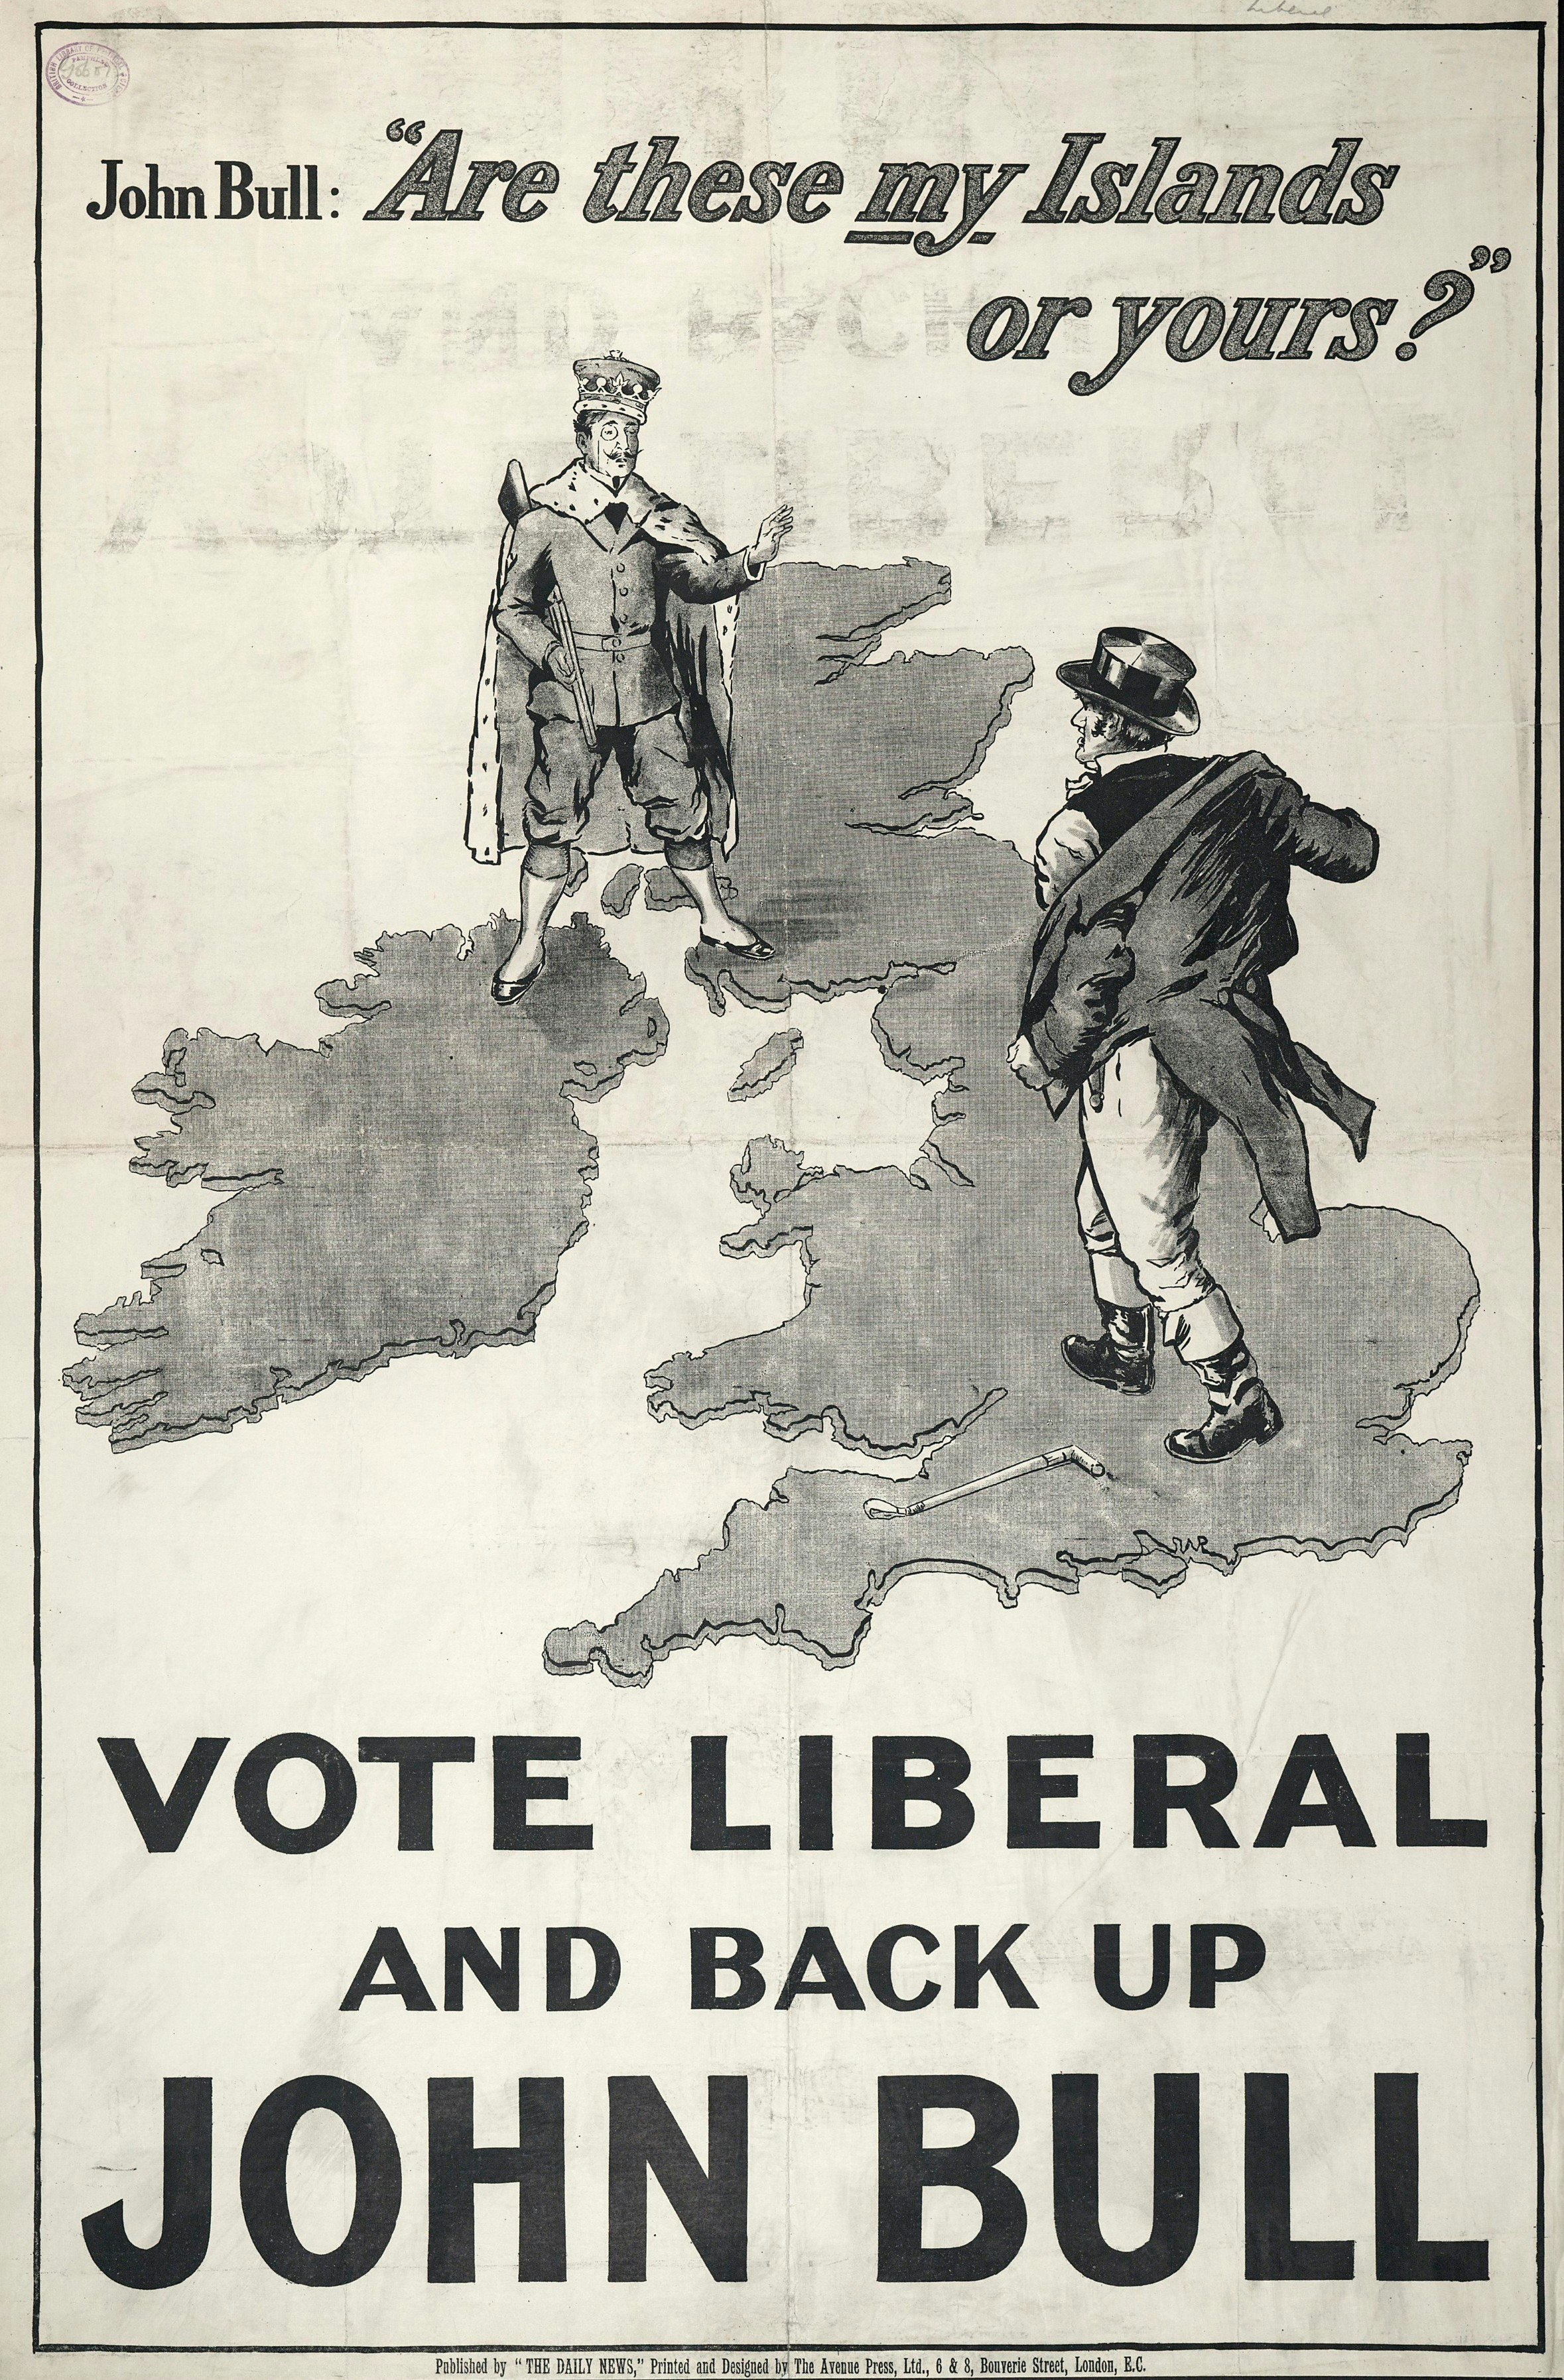 "John Bull: "Are these my Islands or yours?"" poster. John Bull is seen standing on an outline map of the British Isles (he stands squarely between London and the Midlands), facing a "Tory peer"-type who is dressed in hunting clothes, ermine-trimmed robes, and a monocle, and carrying a shotgun. The peer has one foot in Northern Ireland, and one in Scotland. John Bull is taking off his jacket, ready for a fight. The caption under the picture reads "Vote Liberal and back up John Bull". C1905-1910.